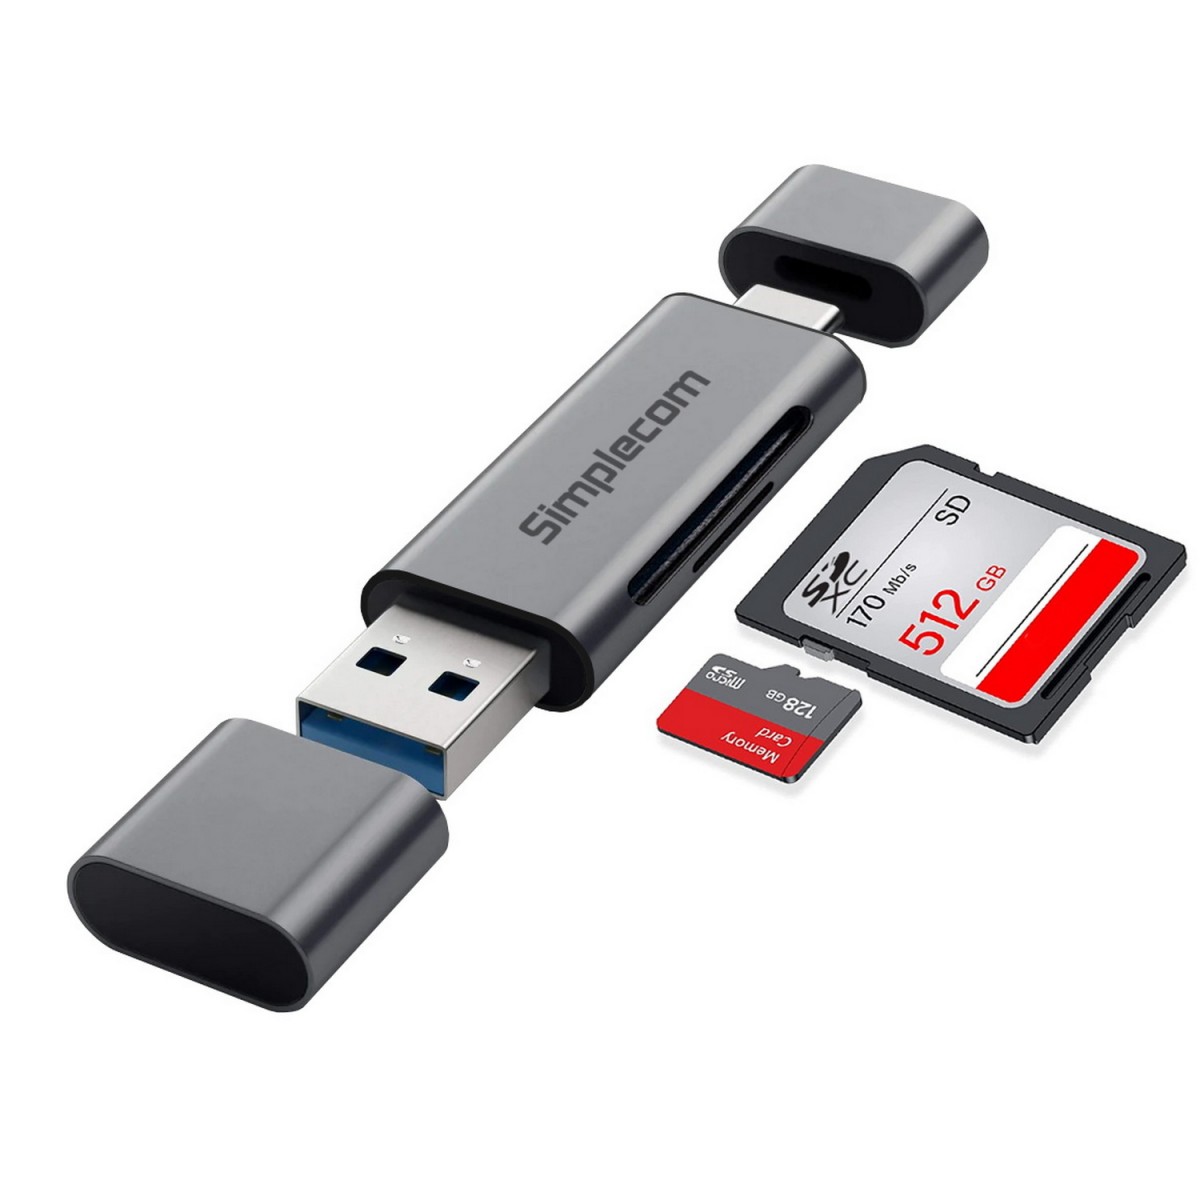  SuperSpeed USB-C Type-C and USB-A SD/MicroSD Card Reader USB 3.2 Gen 1 (USB 3.0)  